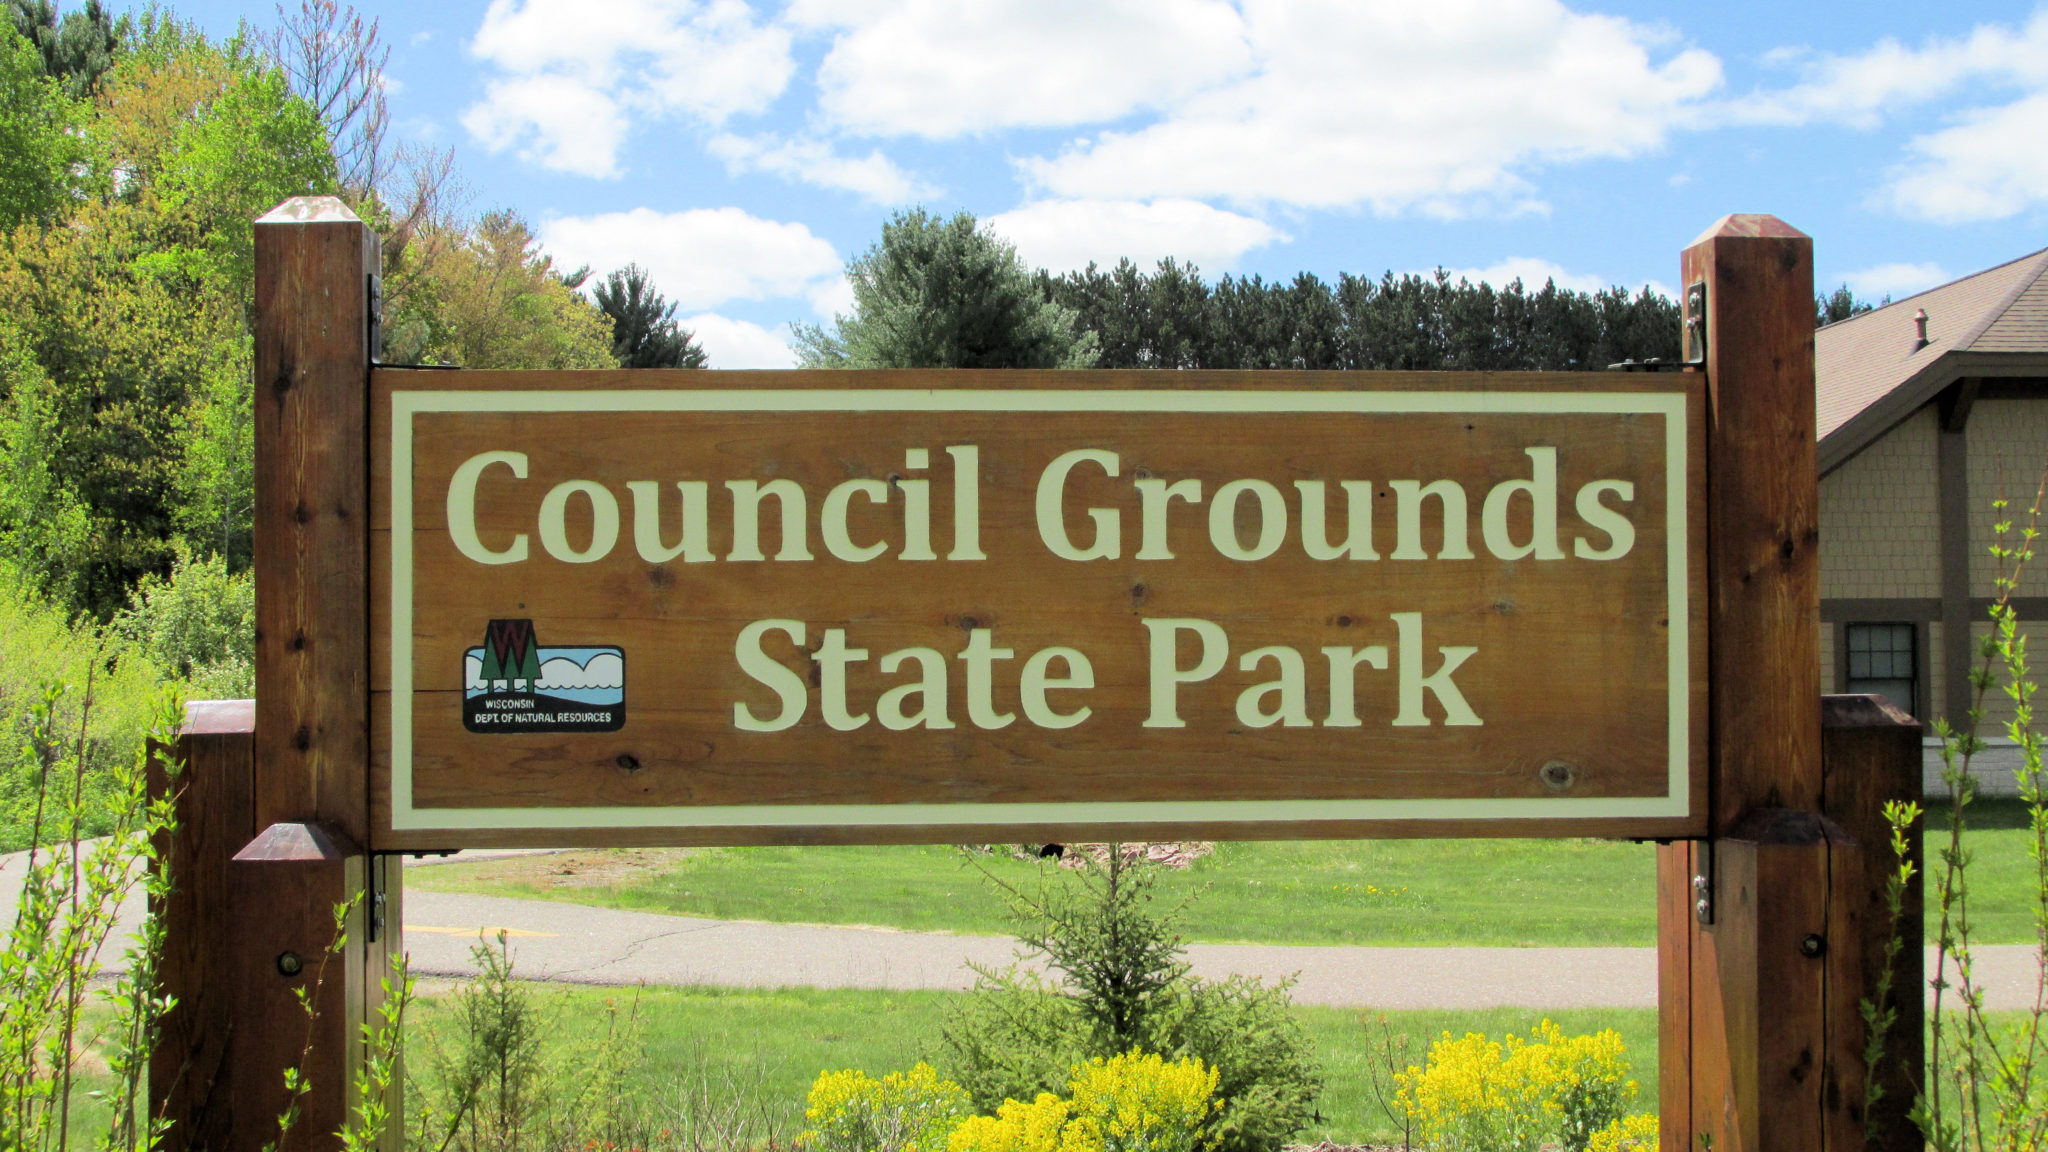 Park grassy grounds council state field bench wisconsin public usa